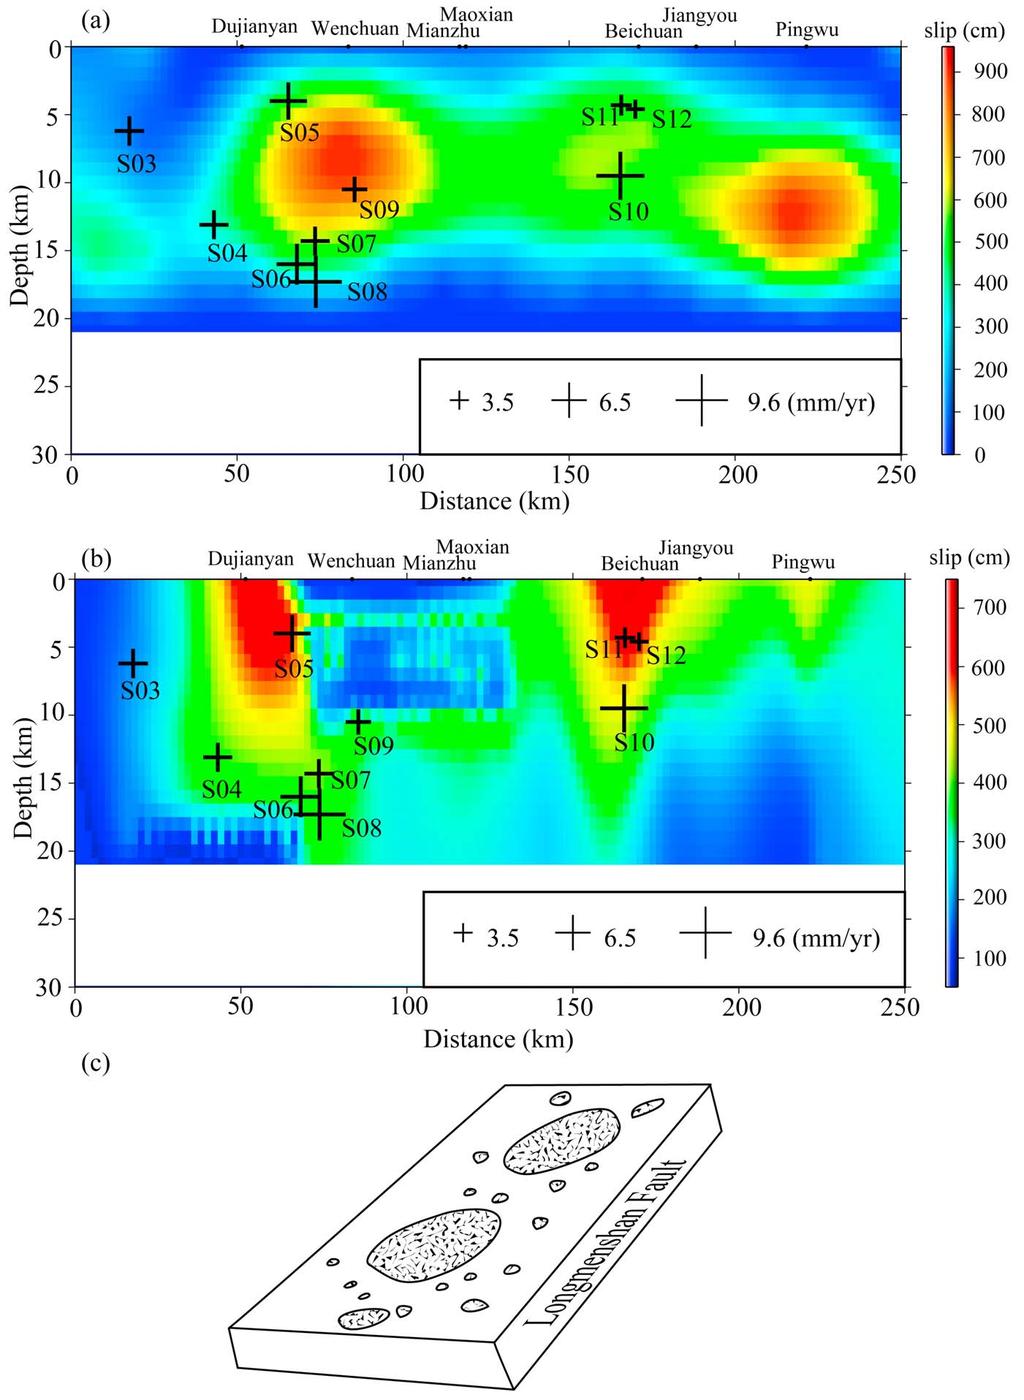 Figure 11. The estimated slip rates are shown together with (a) the coseismic slips inverted from teleseismic waveform data and (b) the coseismic slips inverted from geodetic data.